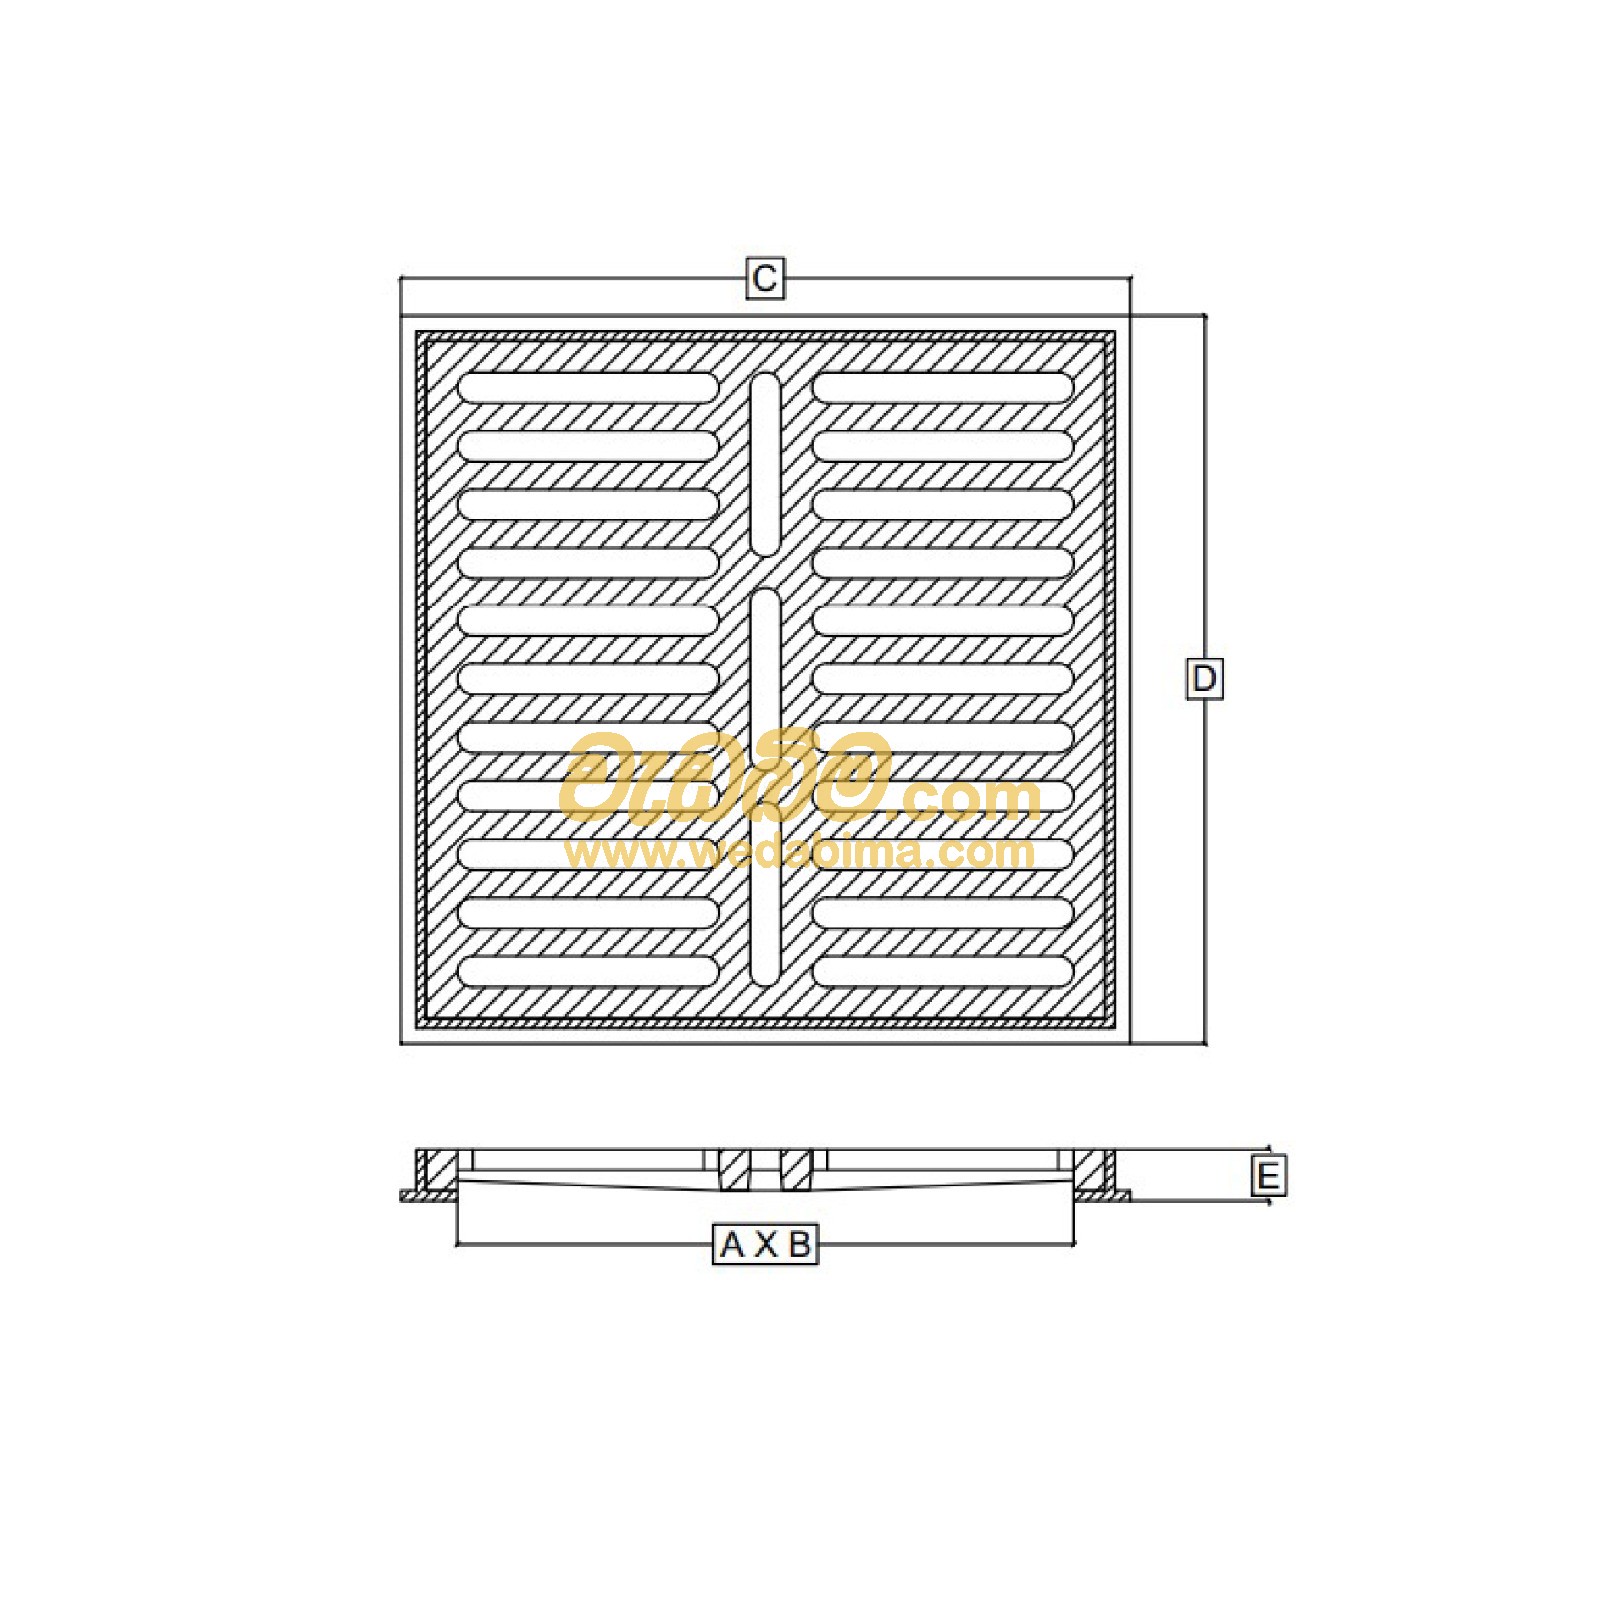 750mm x 750mm Cast-iron Grating cover